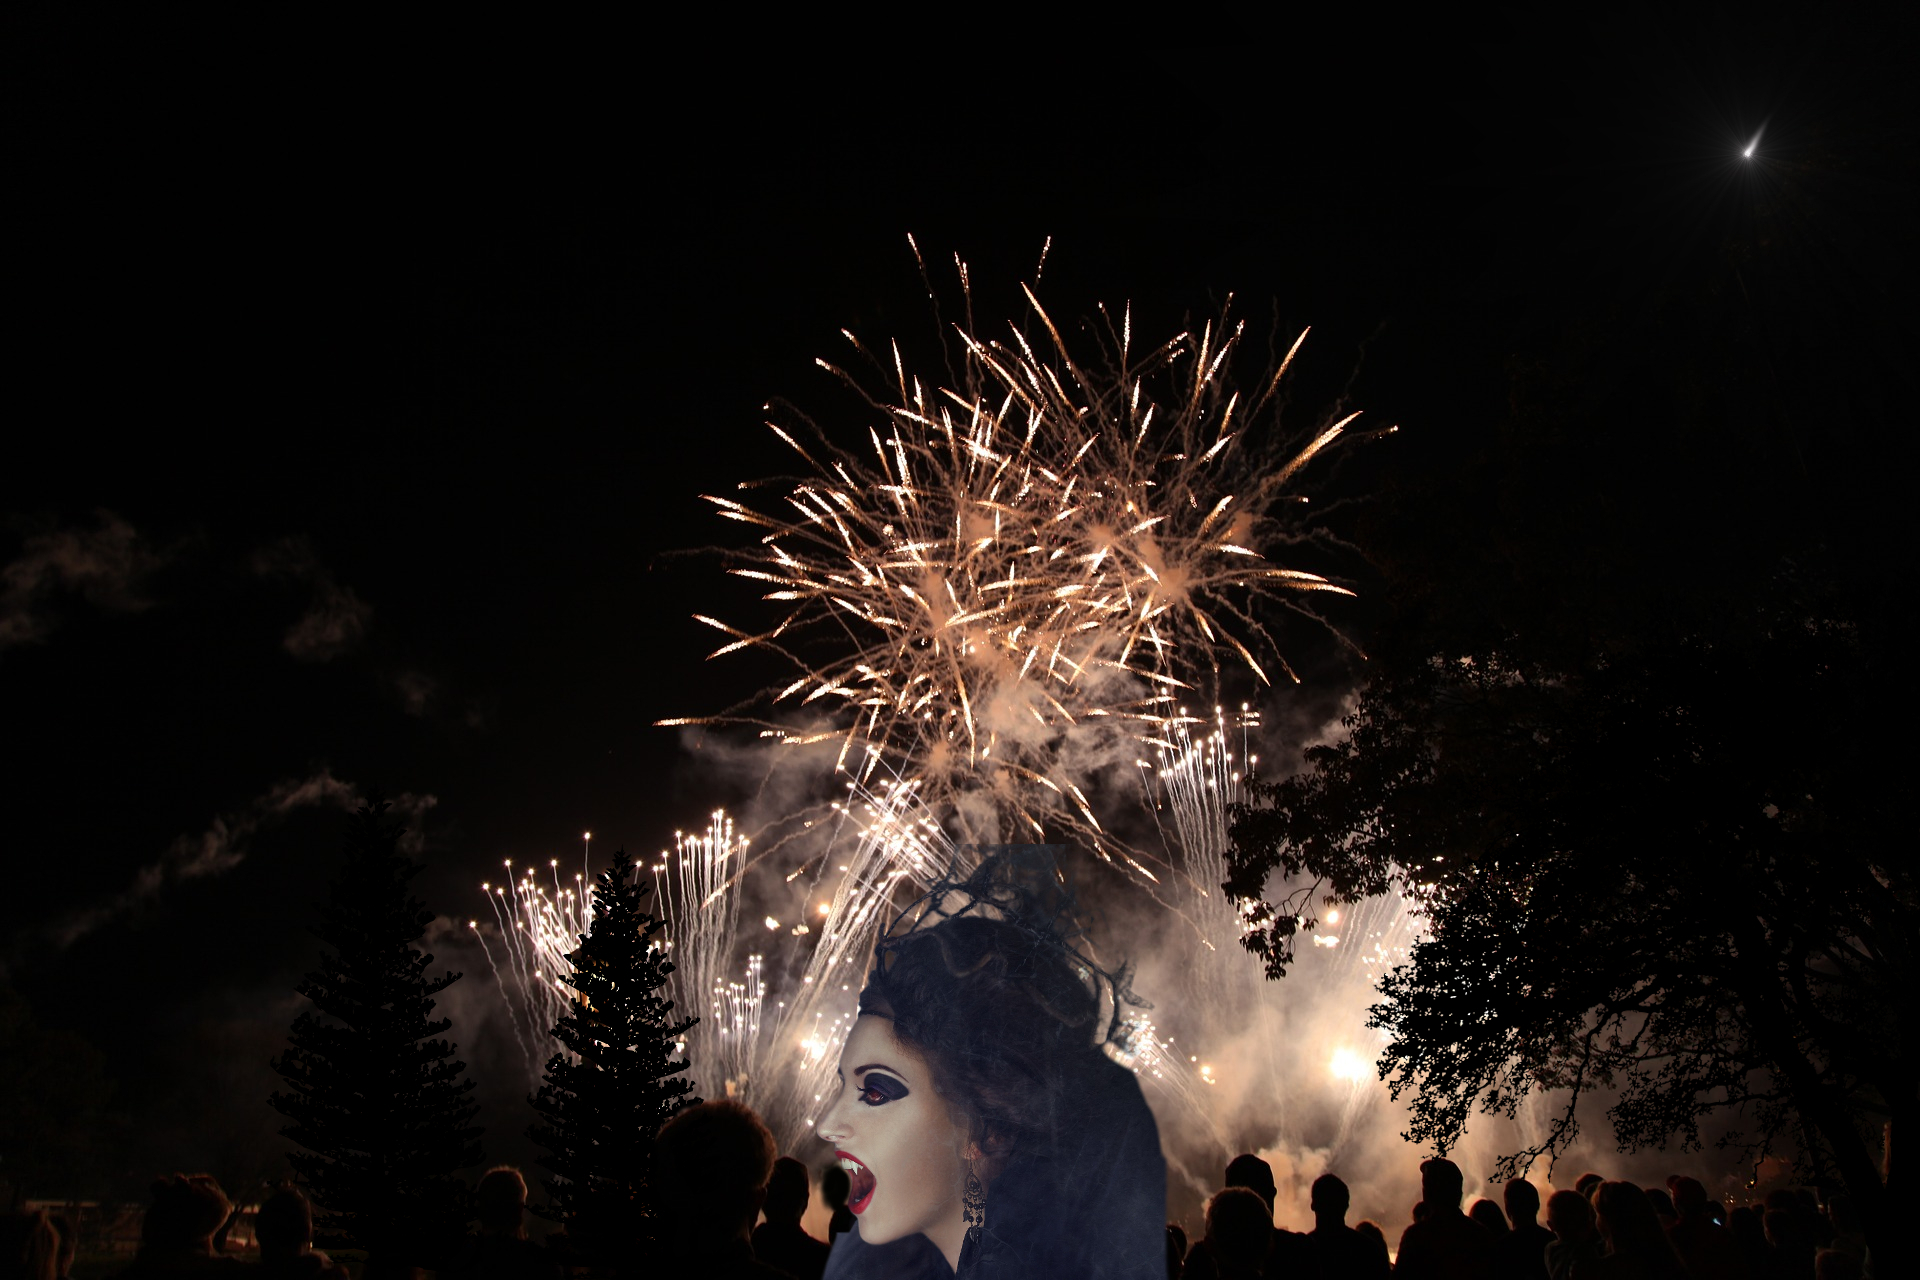 A female Vampire preys upon a crowd of innocent humans enjoying a Fourth Of July fireworks show!